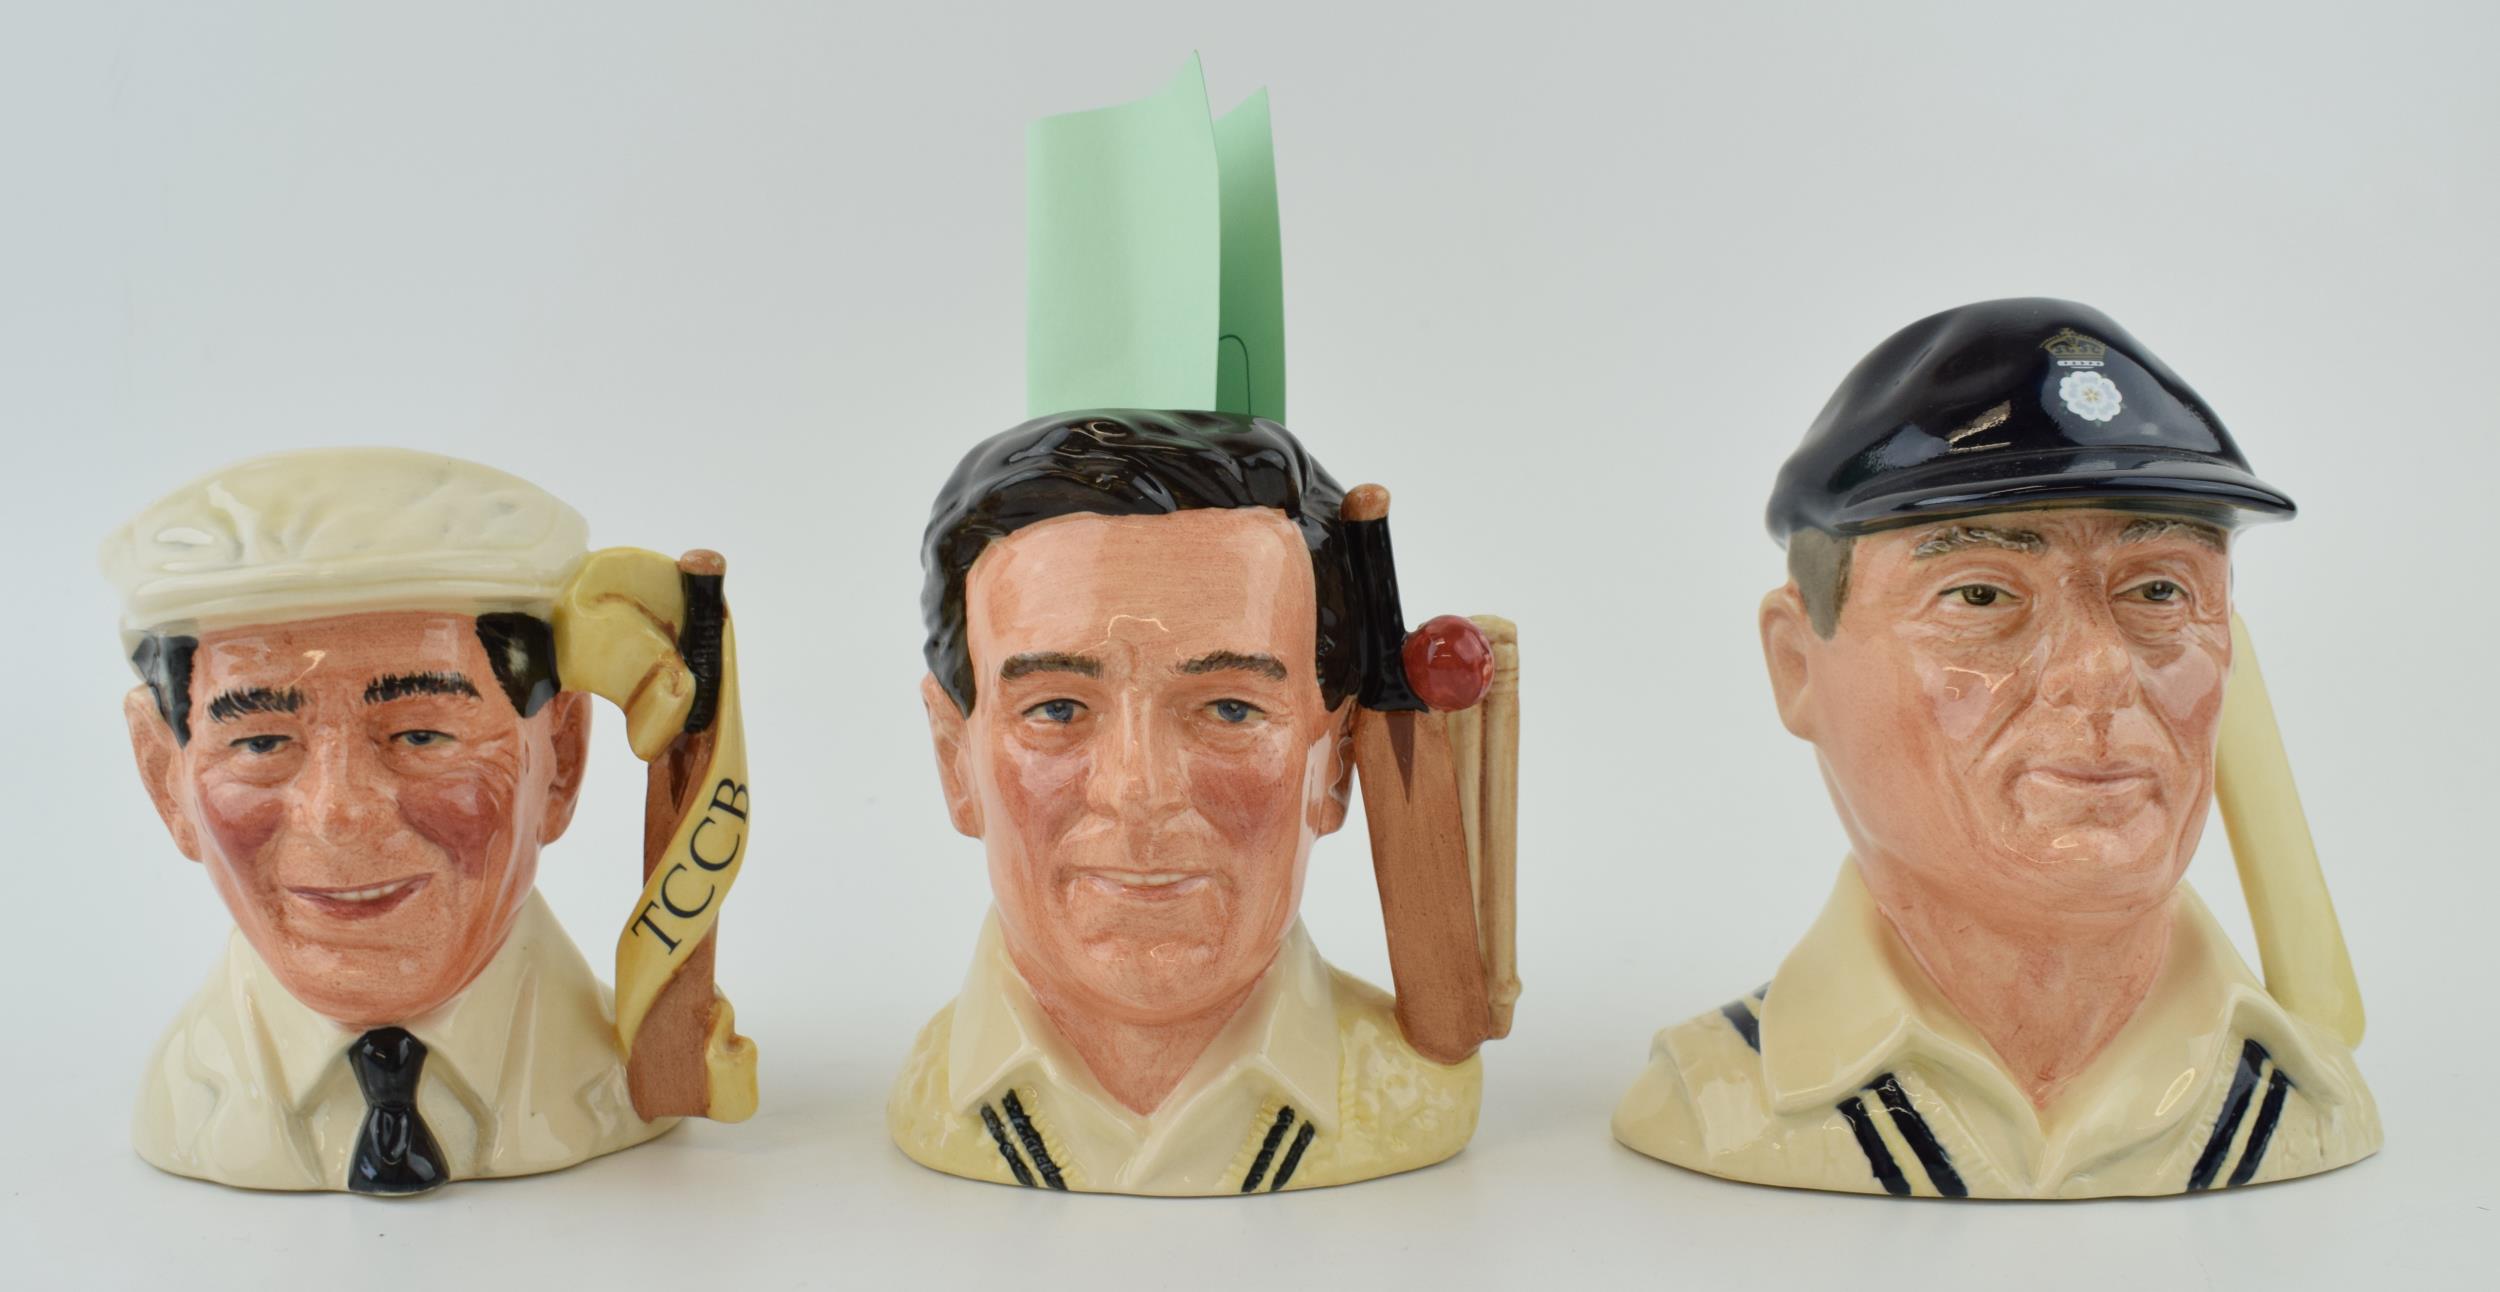 Small Royal Doulton character jugs of cricketers to include Denis Compton, the Hampshire Cricketer